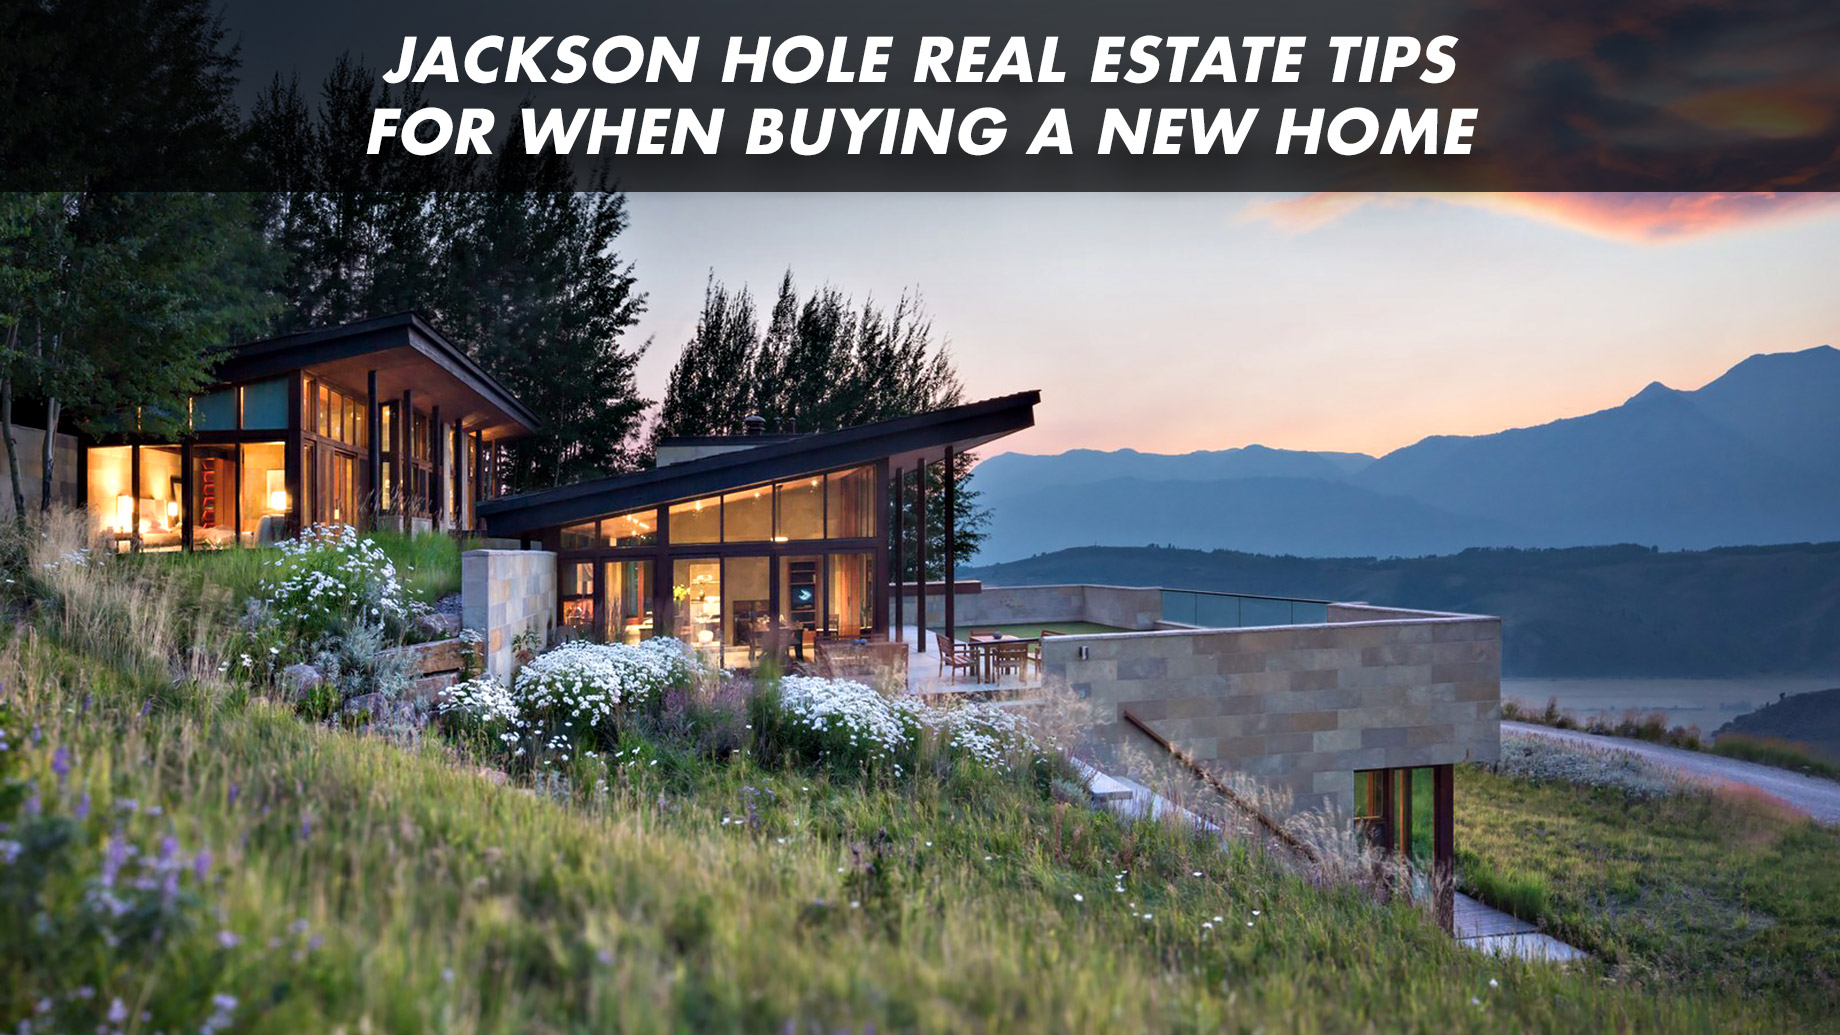 Jackson Hole Real Estate Tips for When Buying a New Home